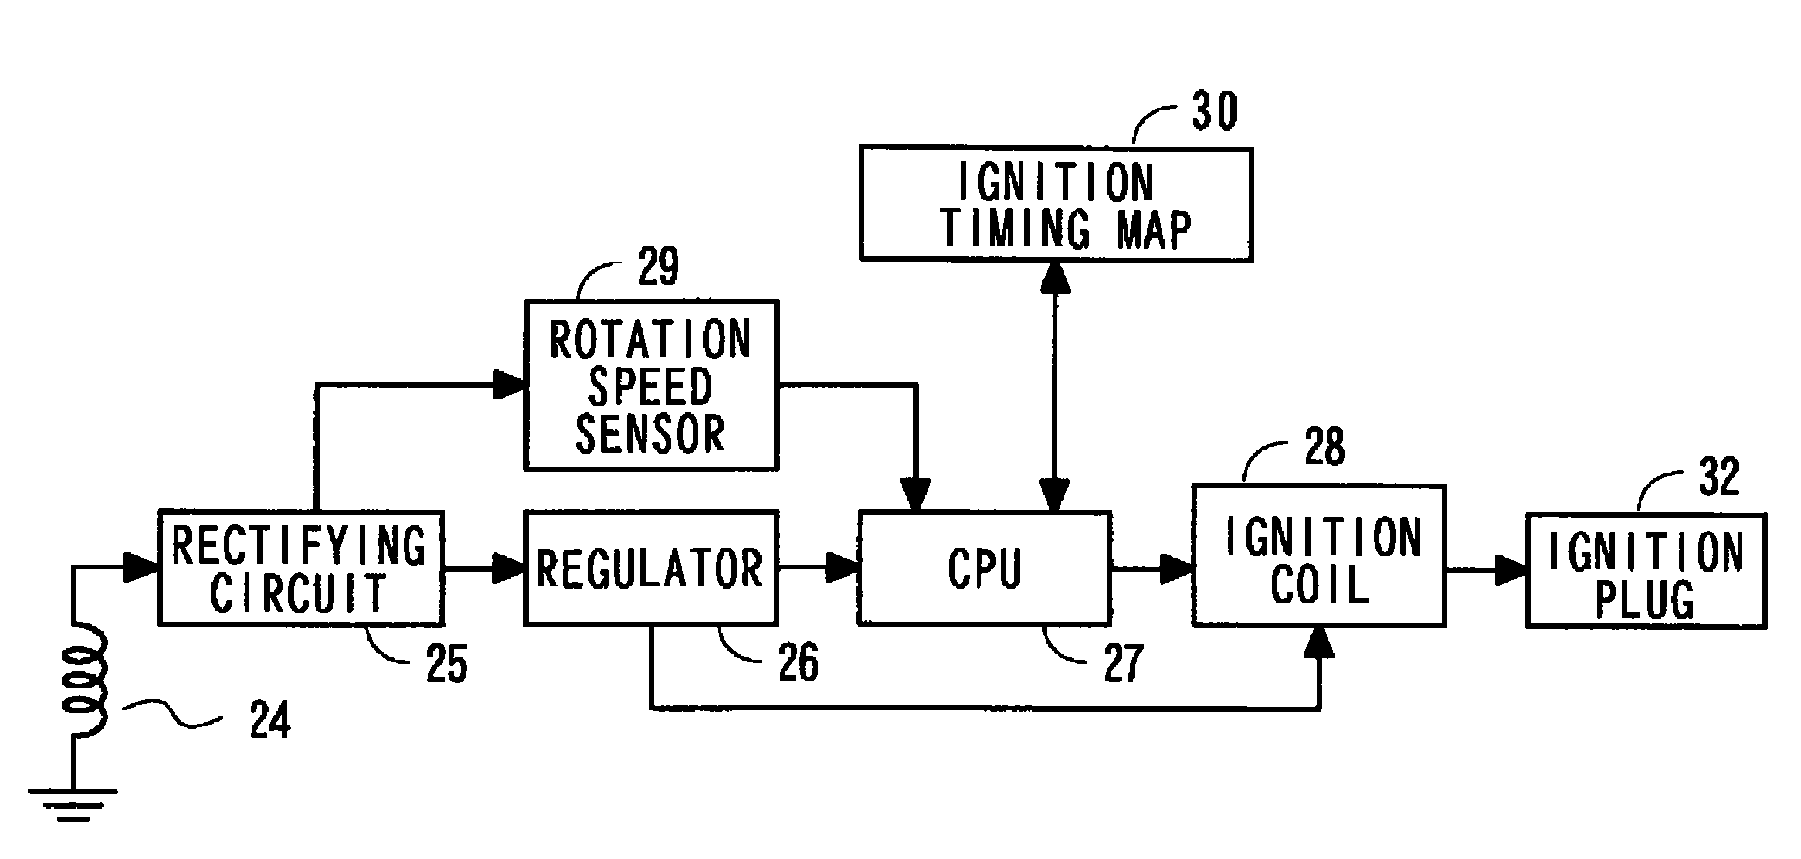 Engine rotation speed controller for working machine